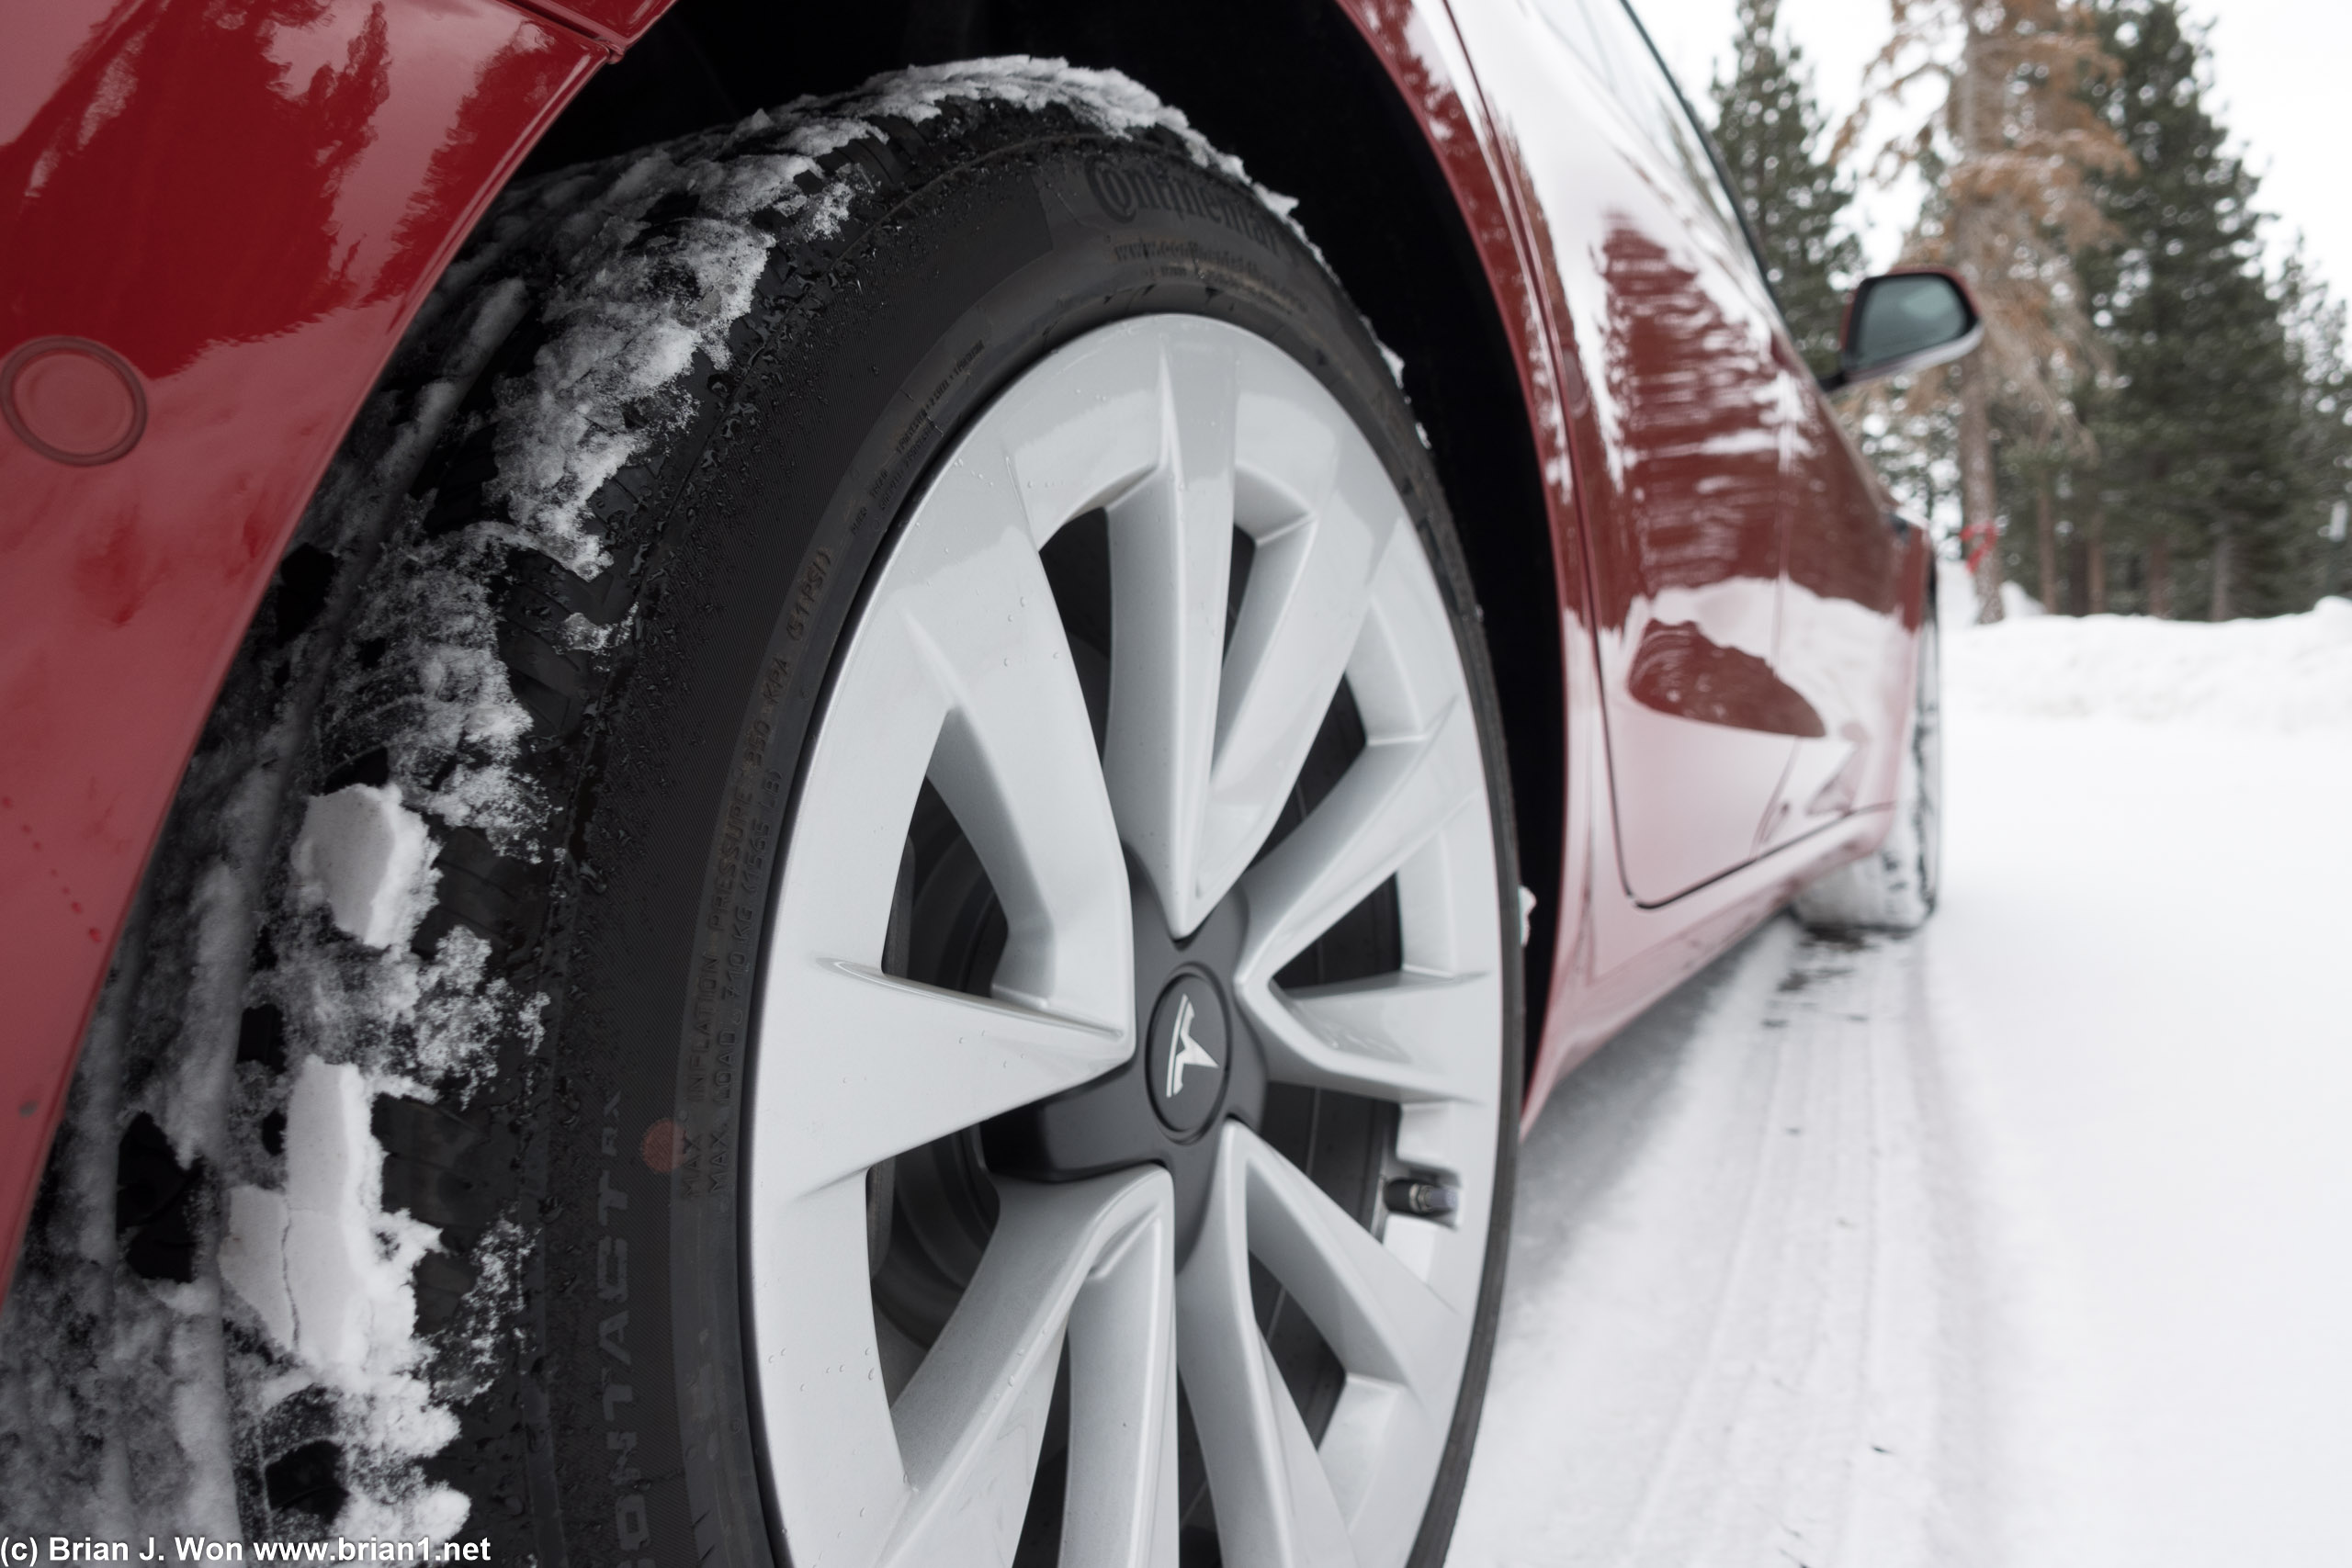 Low rolling resistance tires + AWD = survival.